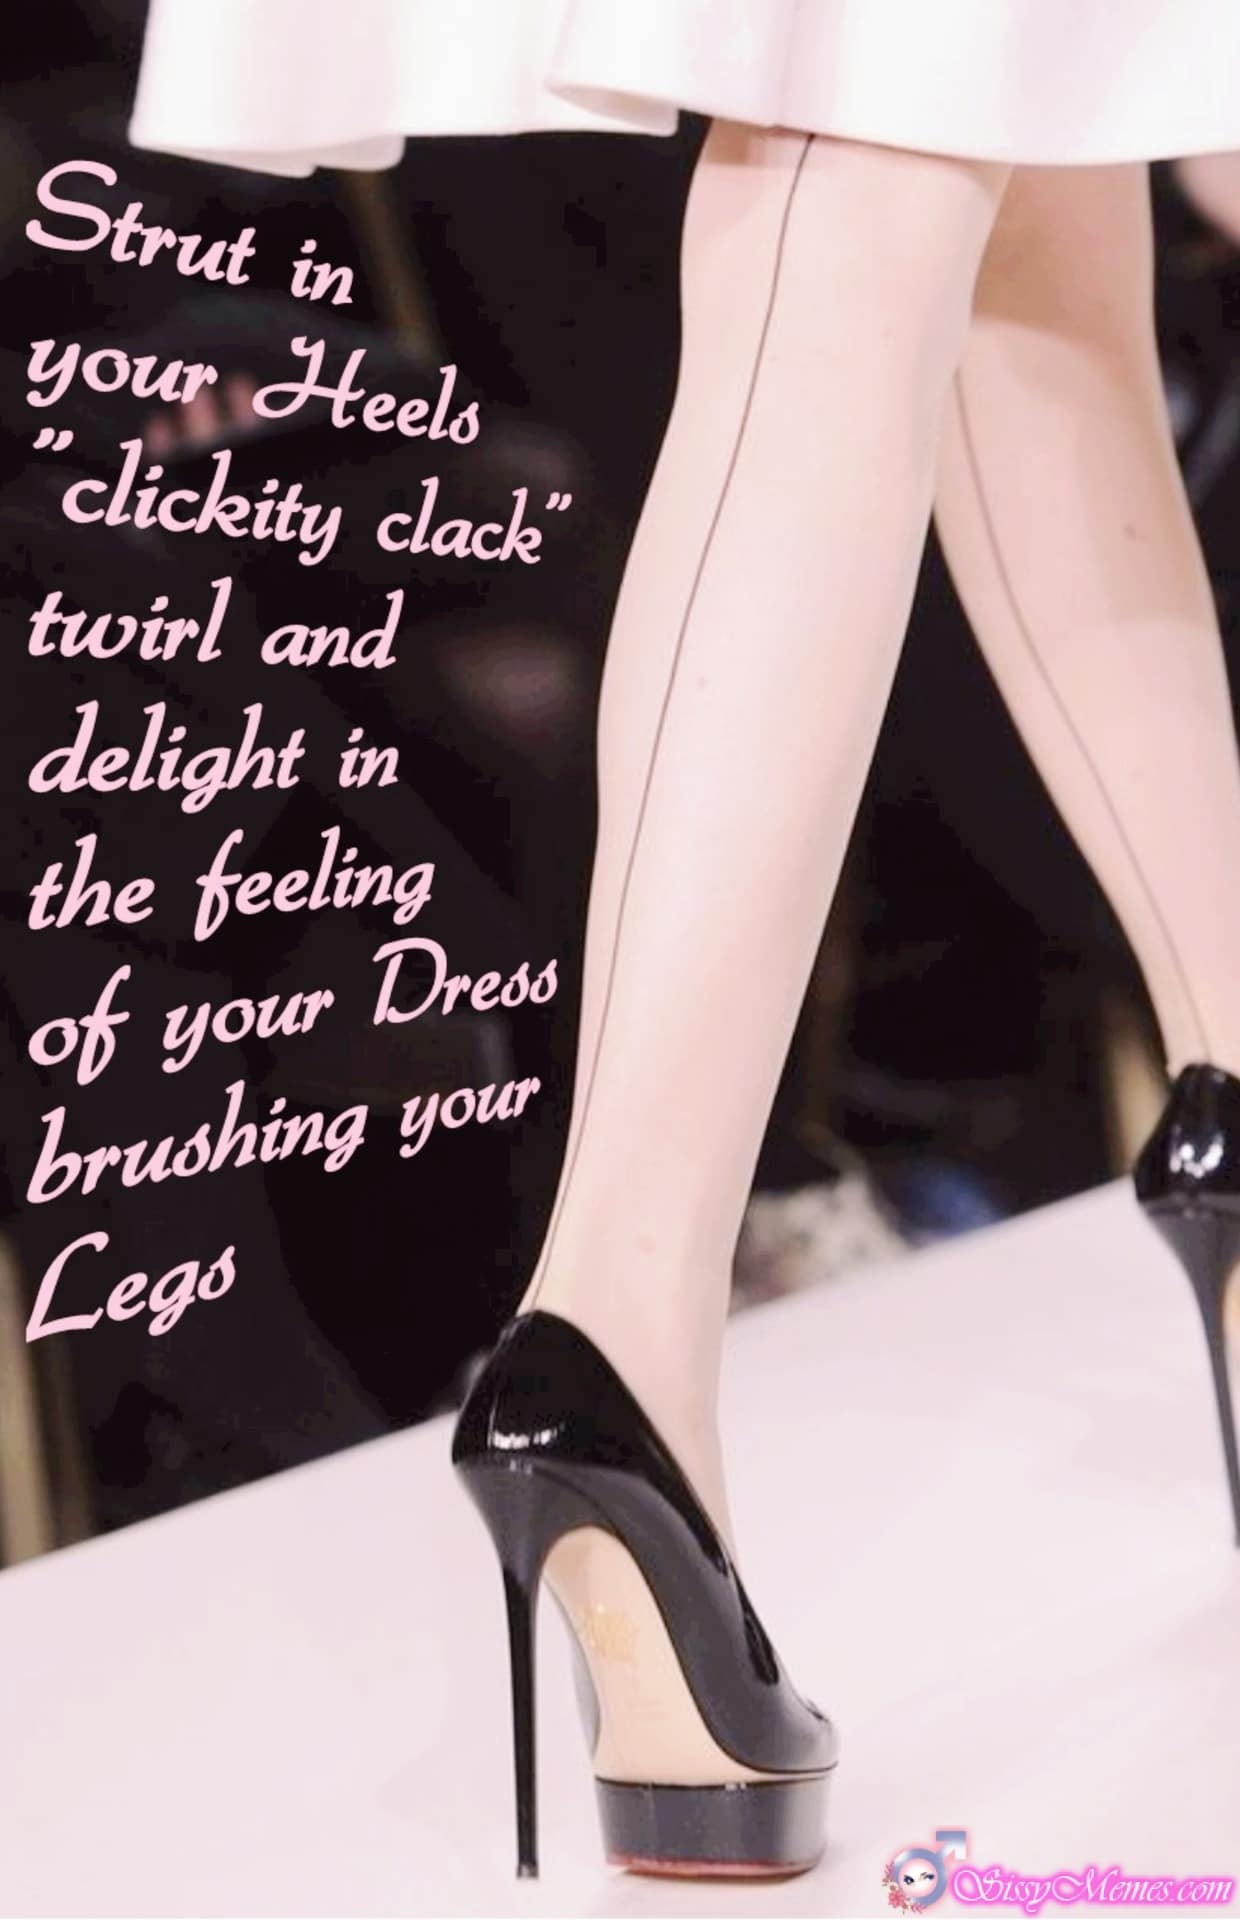 Training Hypno Feminization Femboy hotwife caption: Strut in your Heels clickity clack” twirl and delight in the feeling of your your Dress brushing your Legs High Heels on Slender Sissytraps Legs